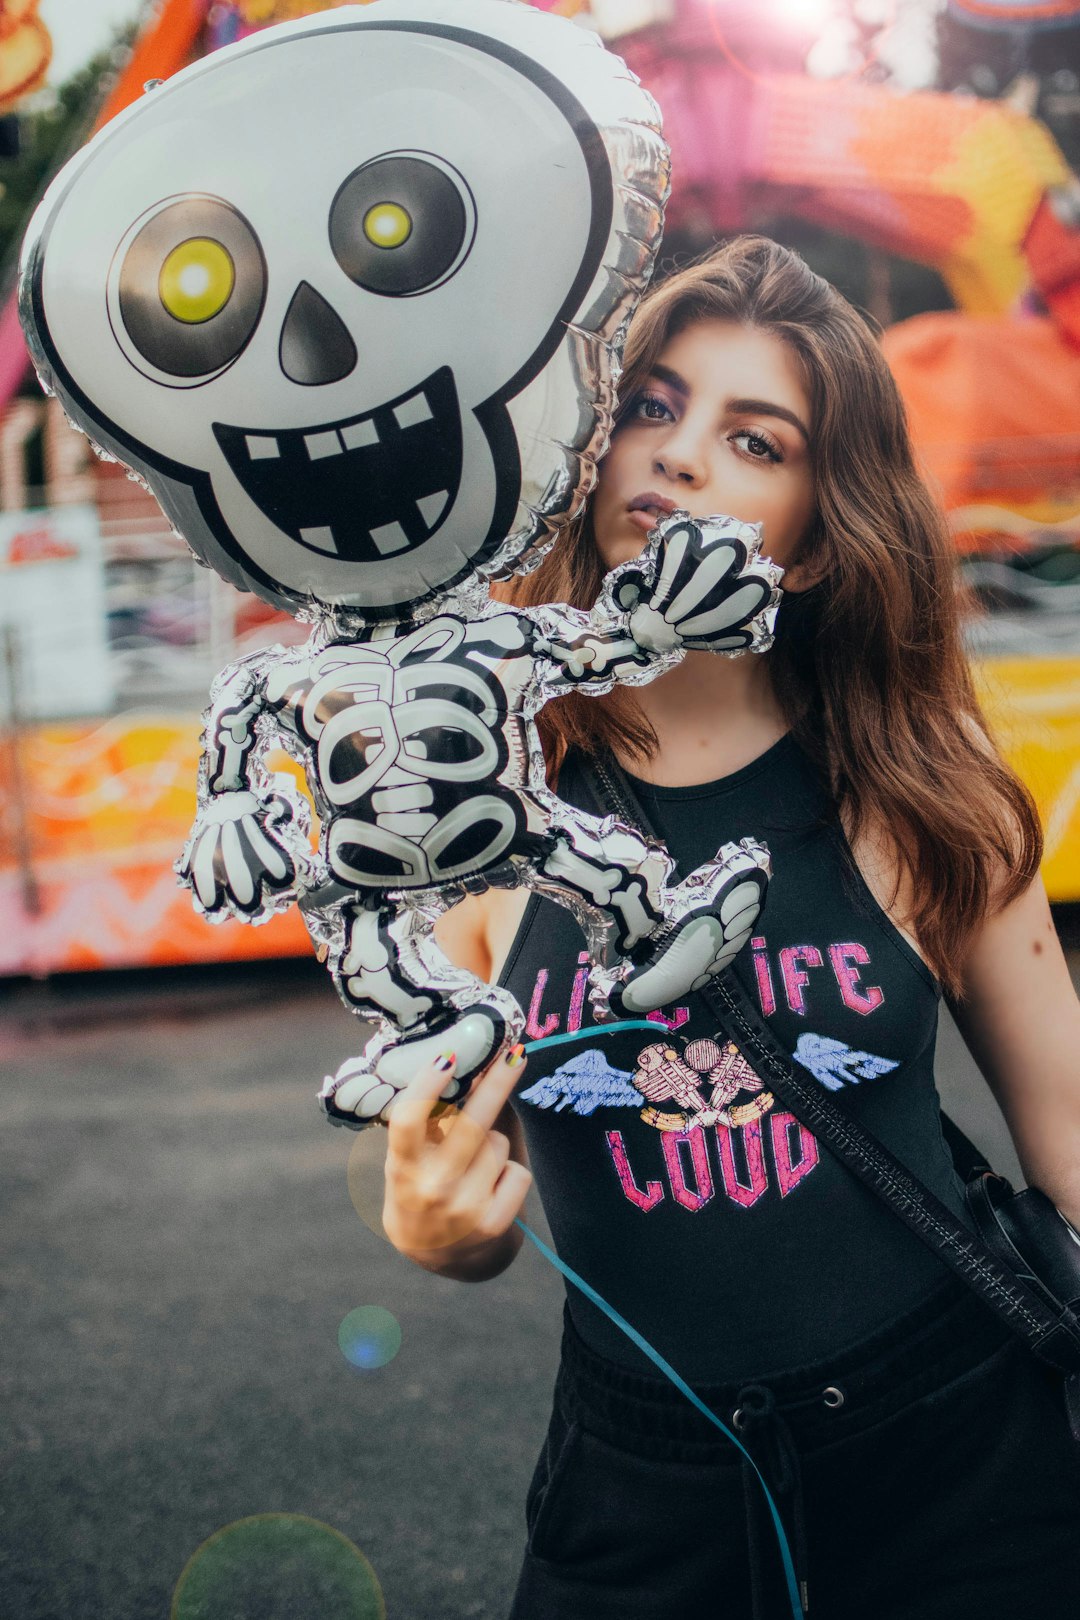 woman in black tank top holding white and black skull print balloon